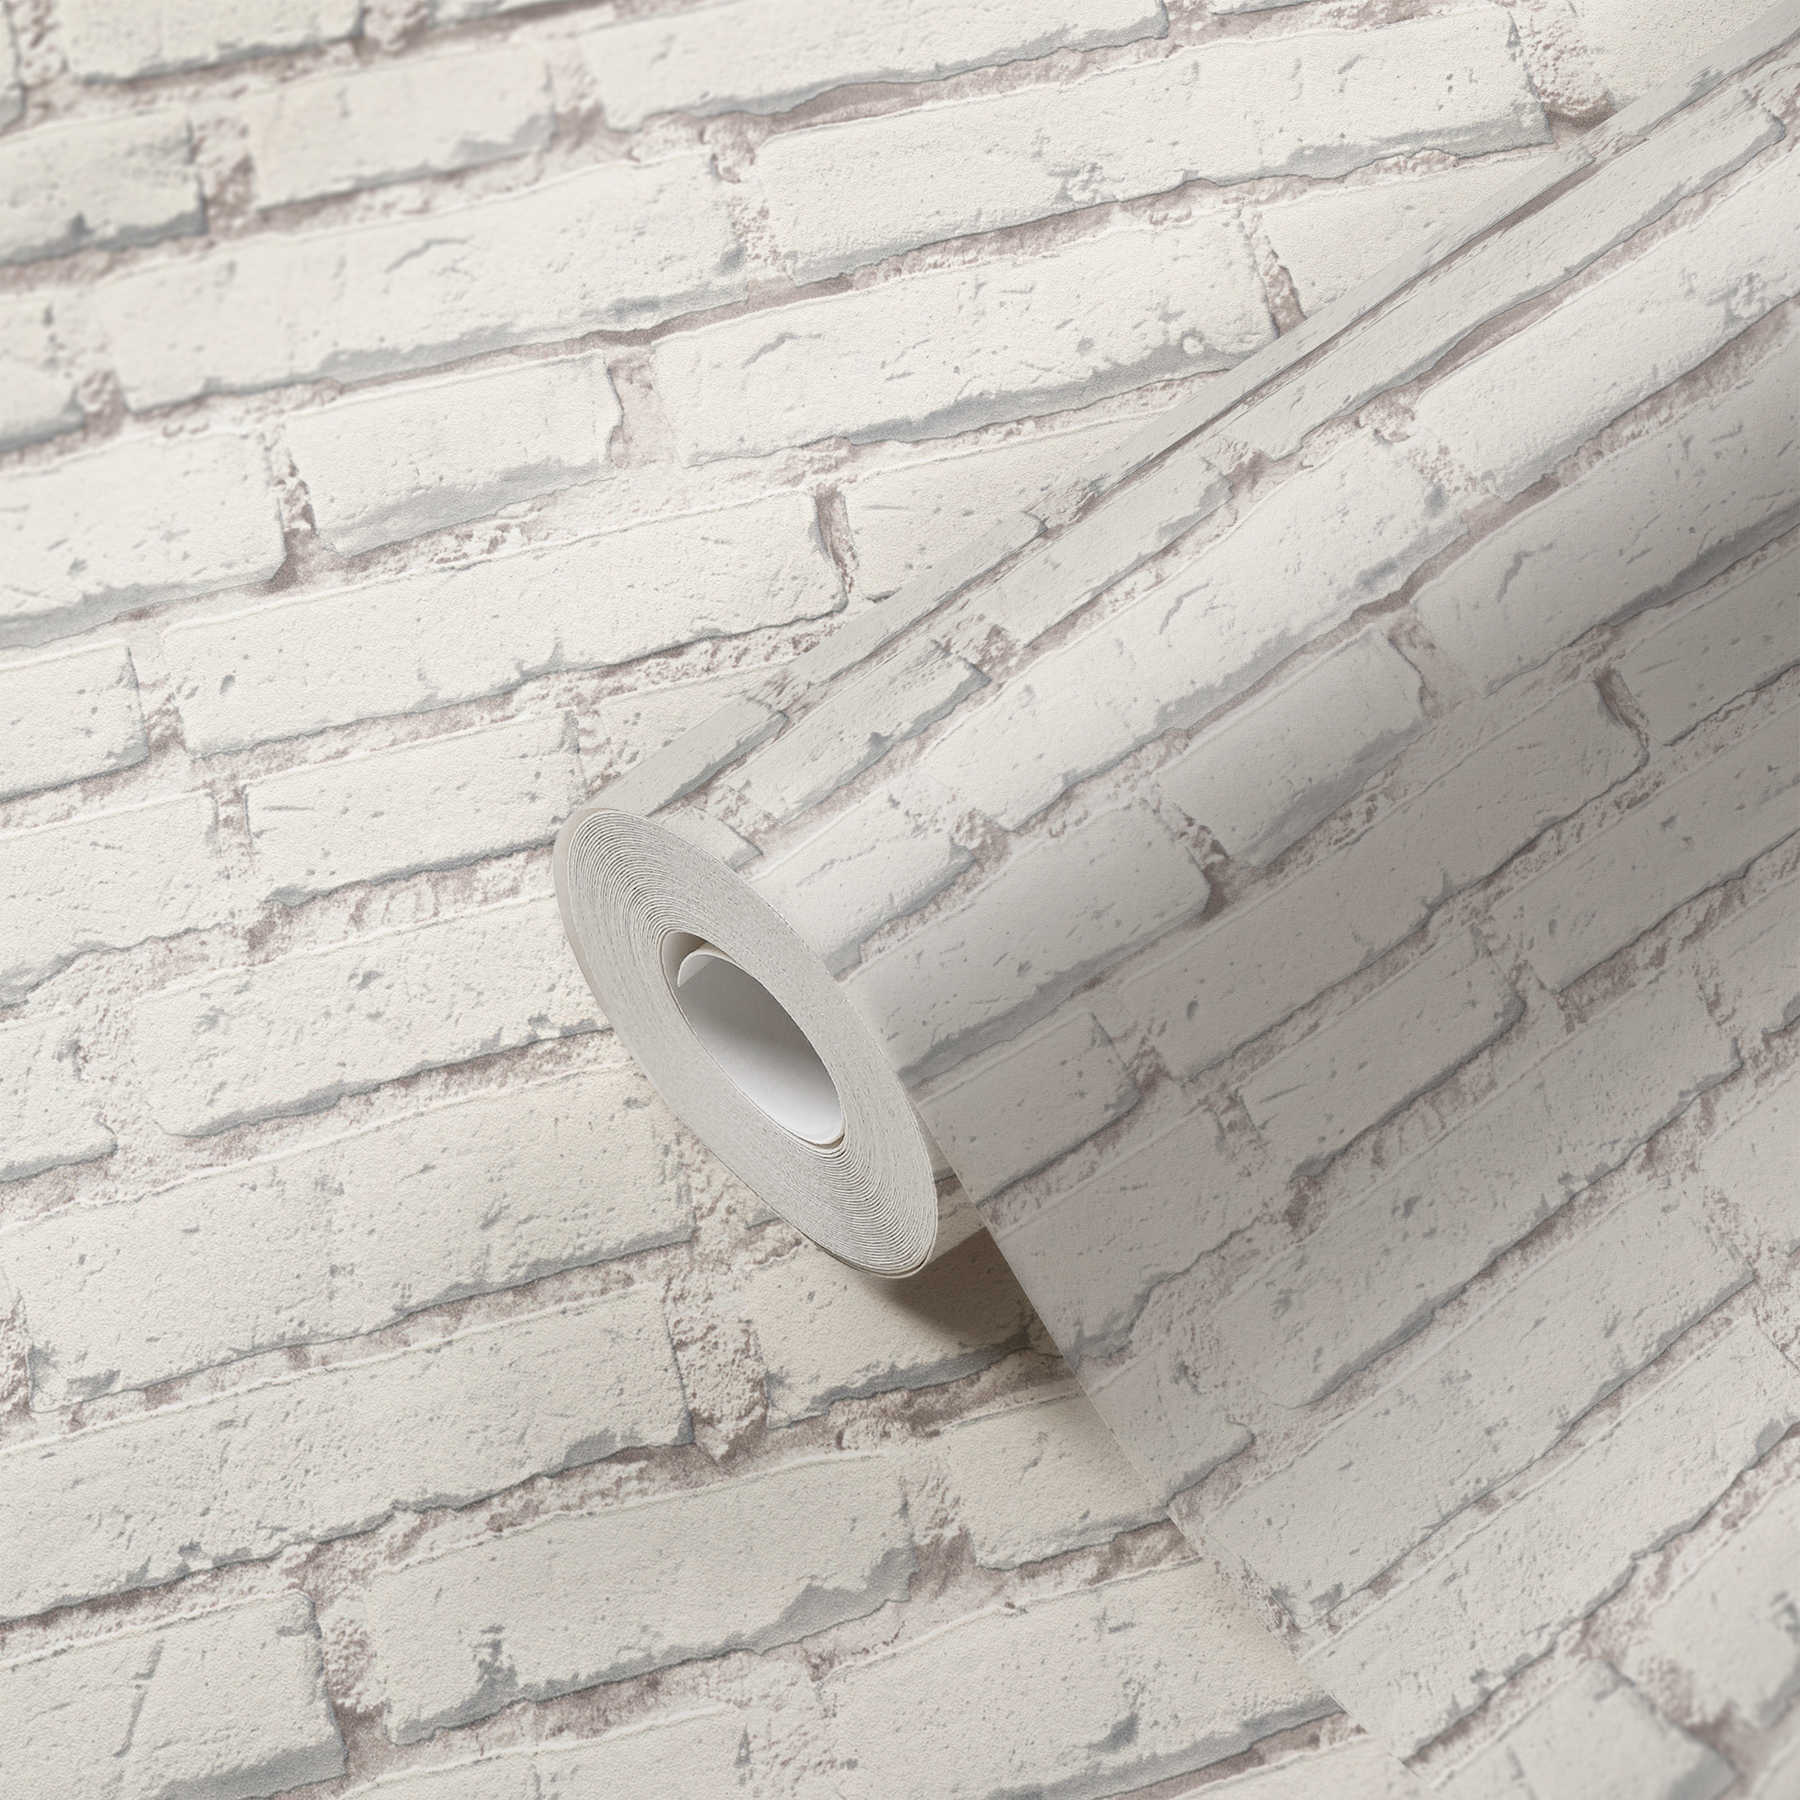             Wallpaper with brick wall with white stones and joints - white, grey
        